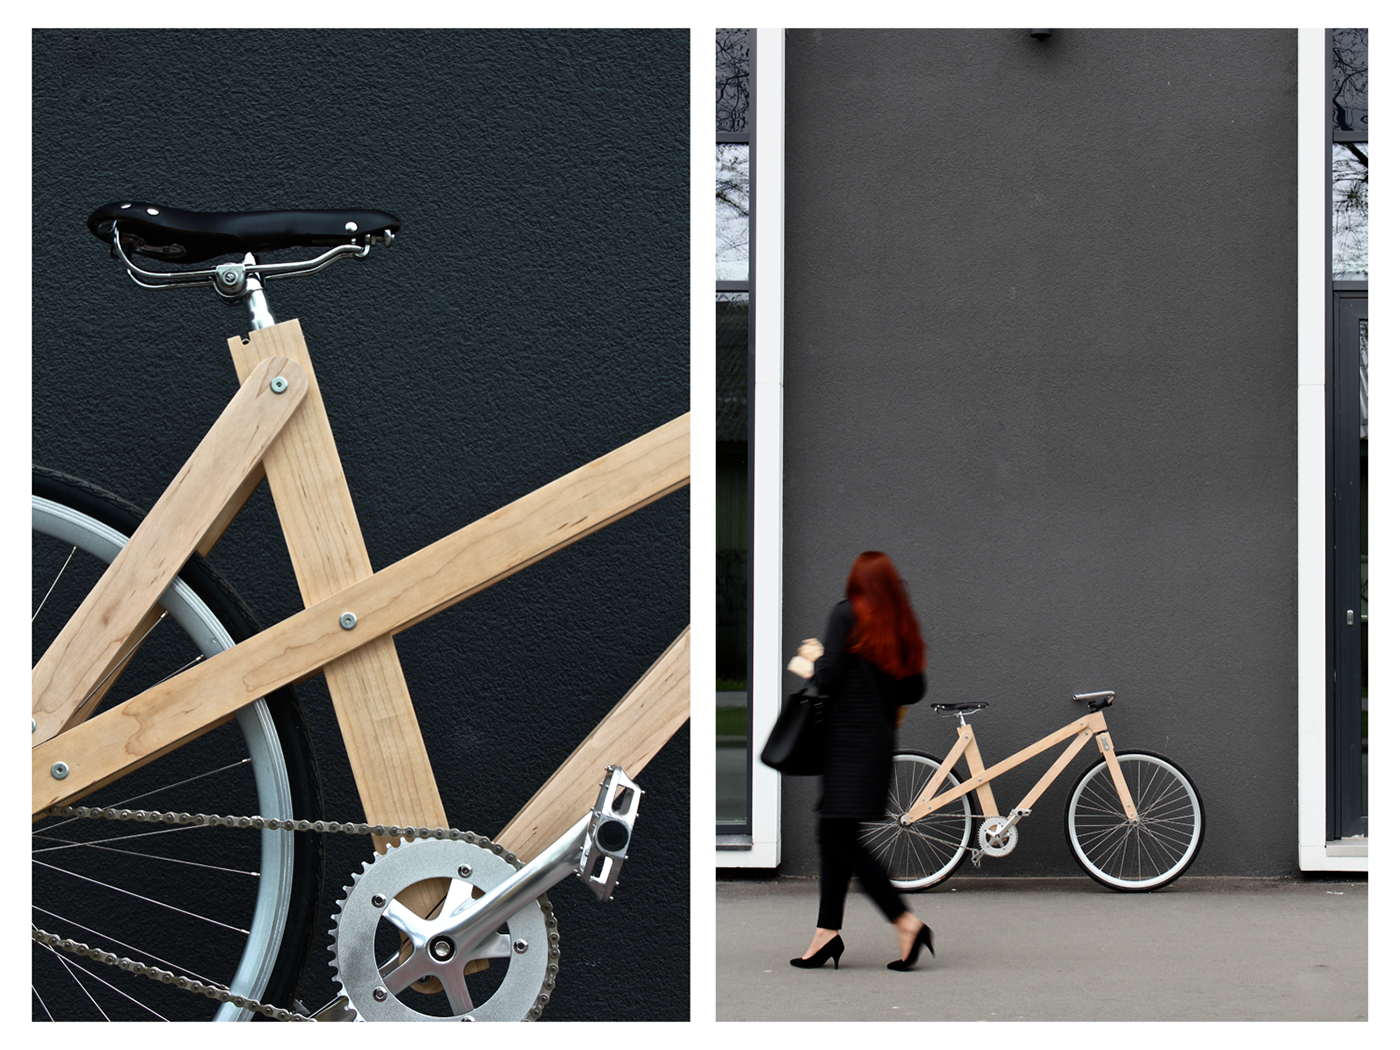 Bicycle wood wooden bicycle